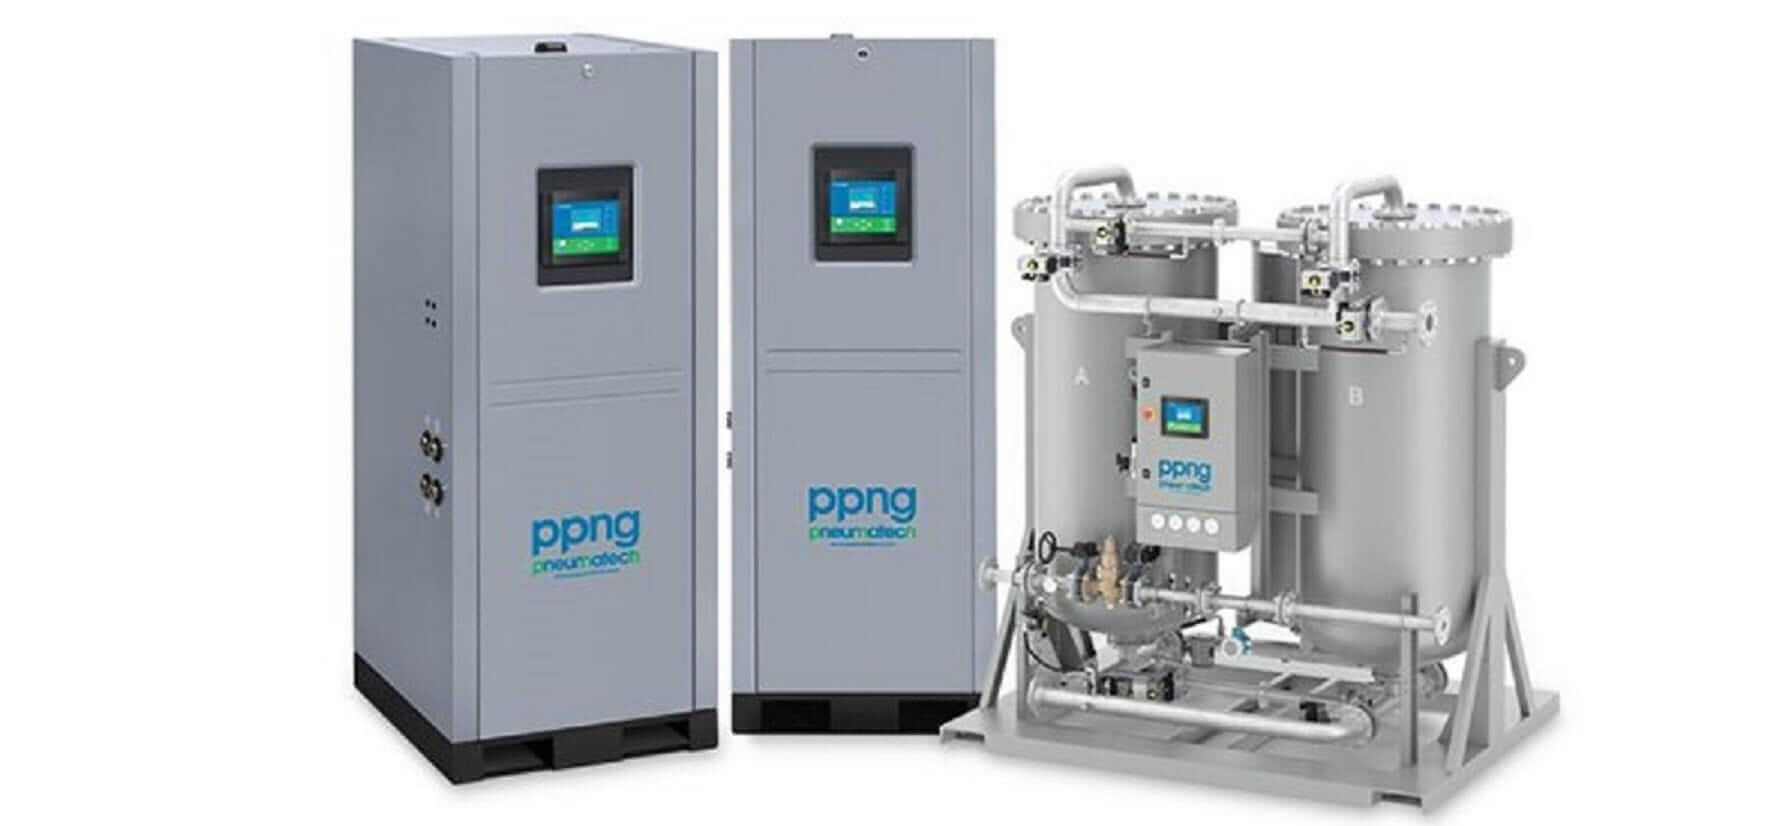 On-site nitrogen and oxygen generators are available for producing your own gases on your own site.